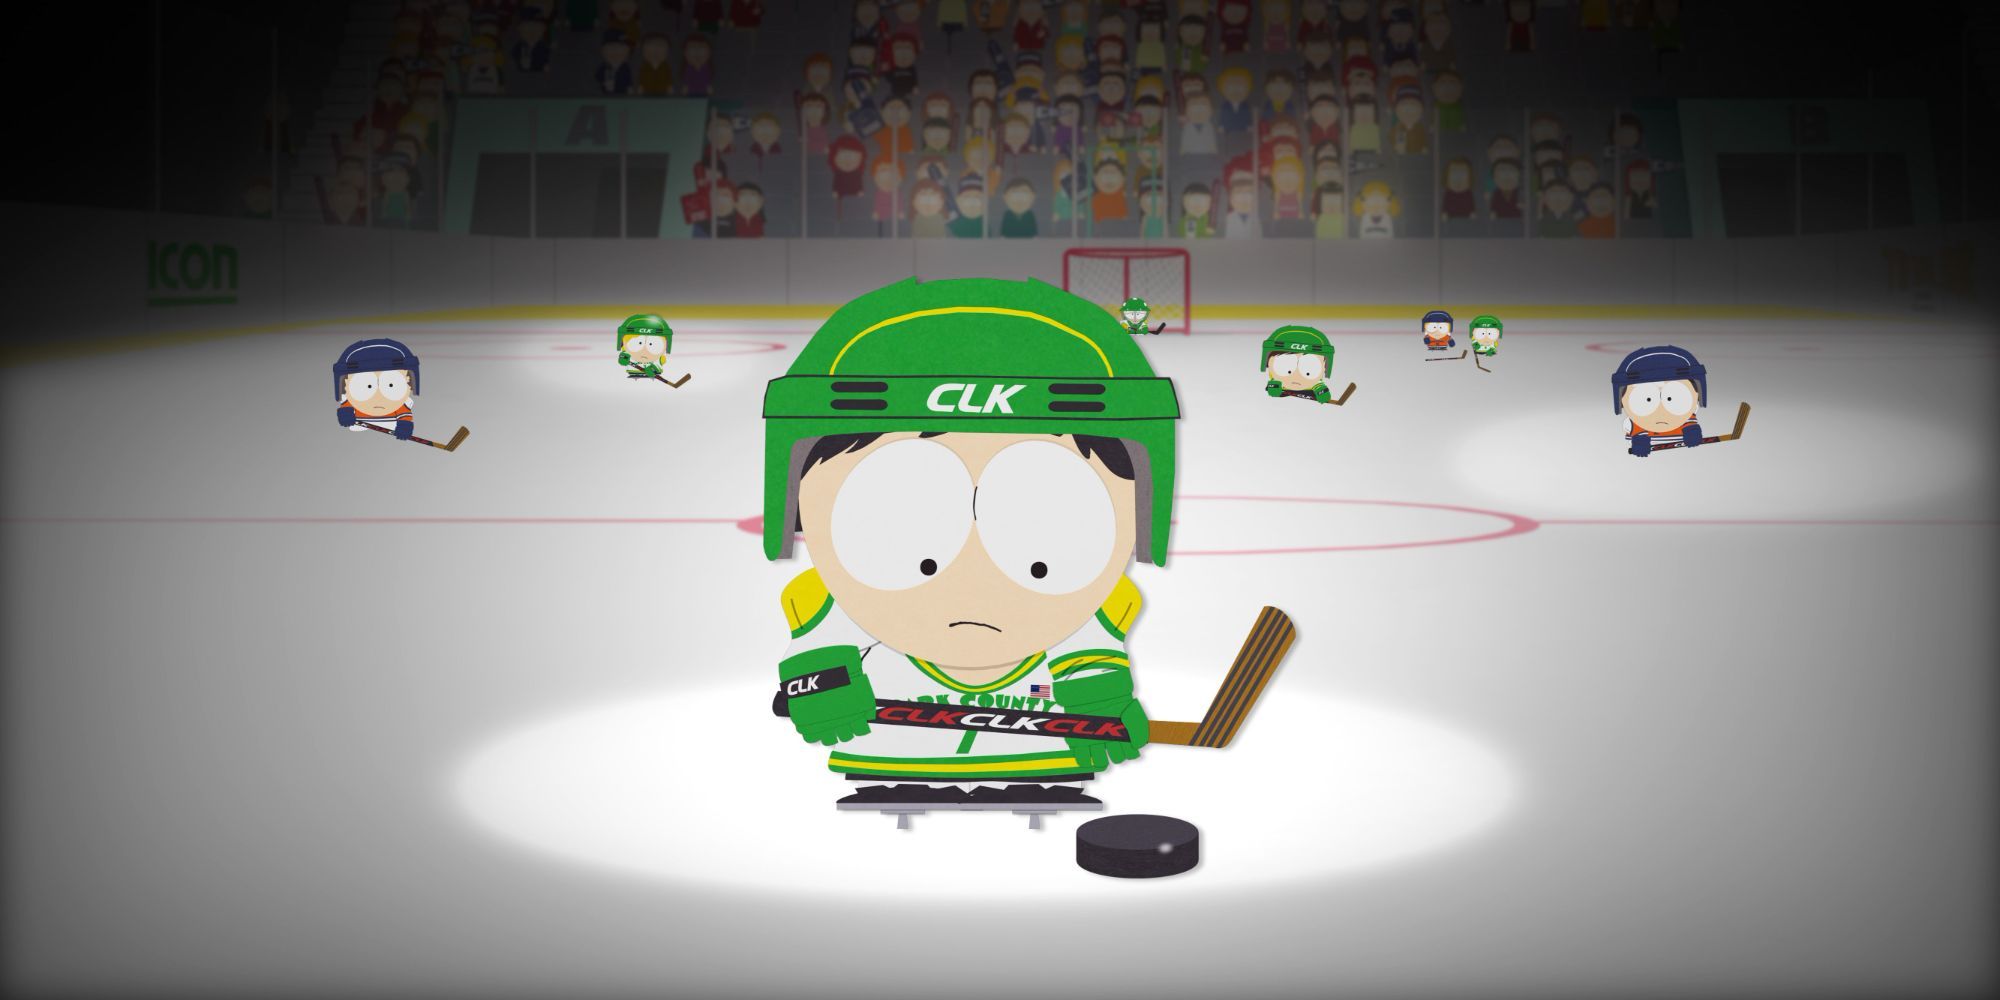 A junior hockey player prepares to take the shot in Stanley's Cup (South Park)